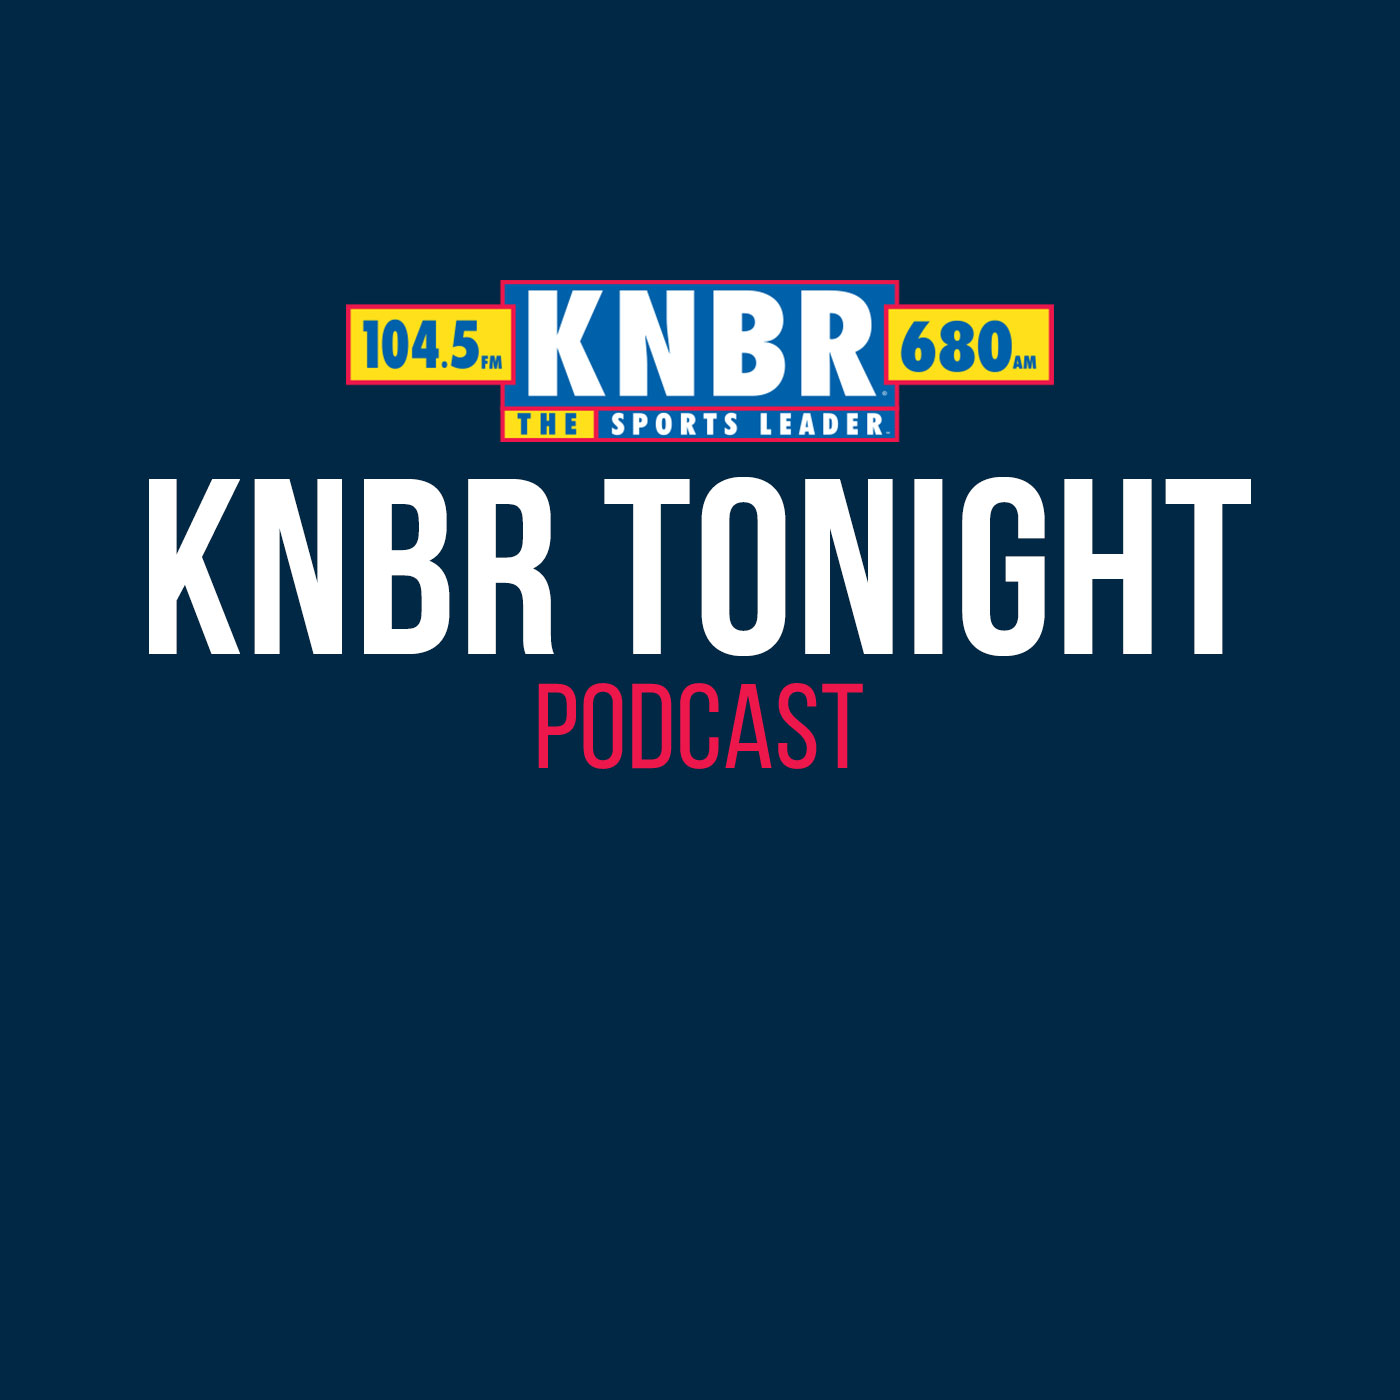 6-14 Dominic Leone joins KNBR Tonight with Kerry Crowley to talk about tonight's Giants 5-2 win